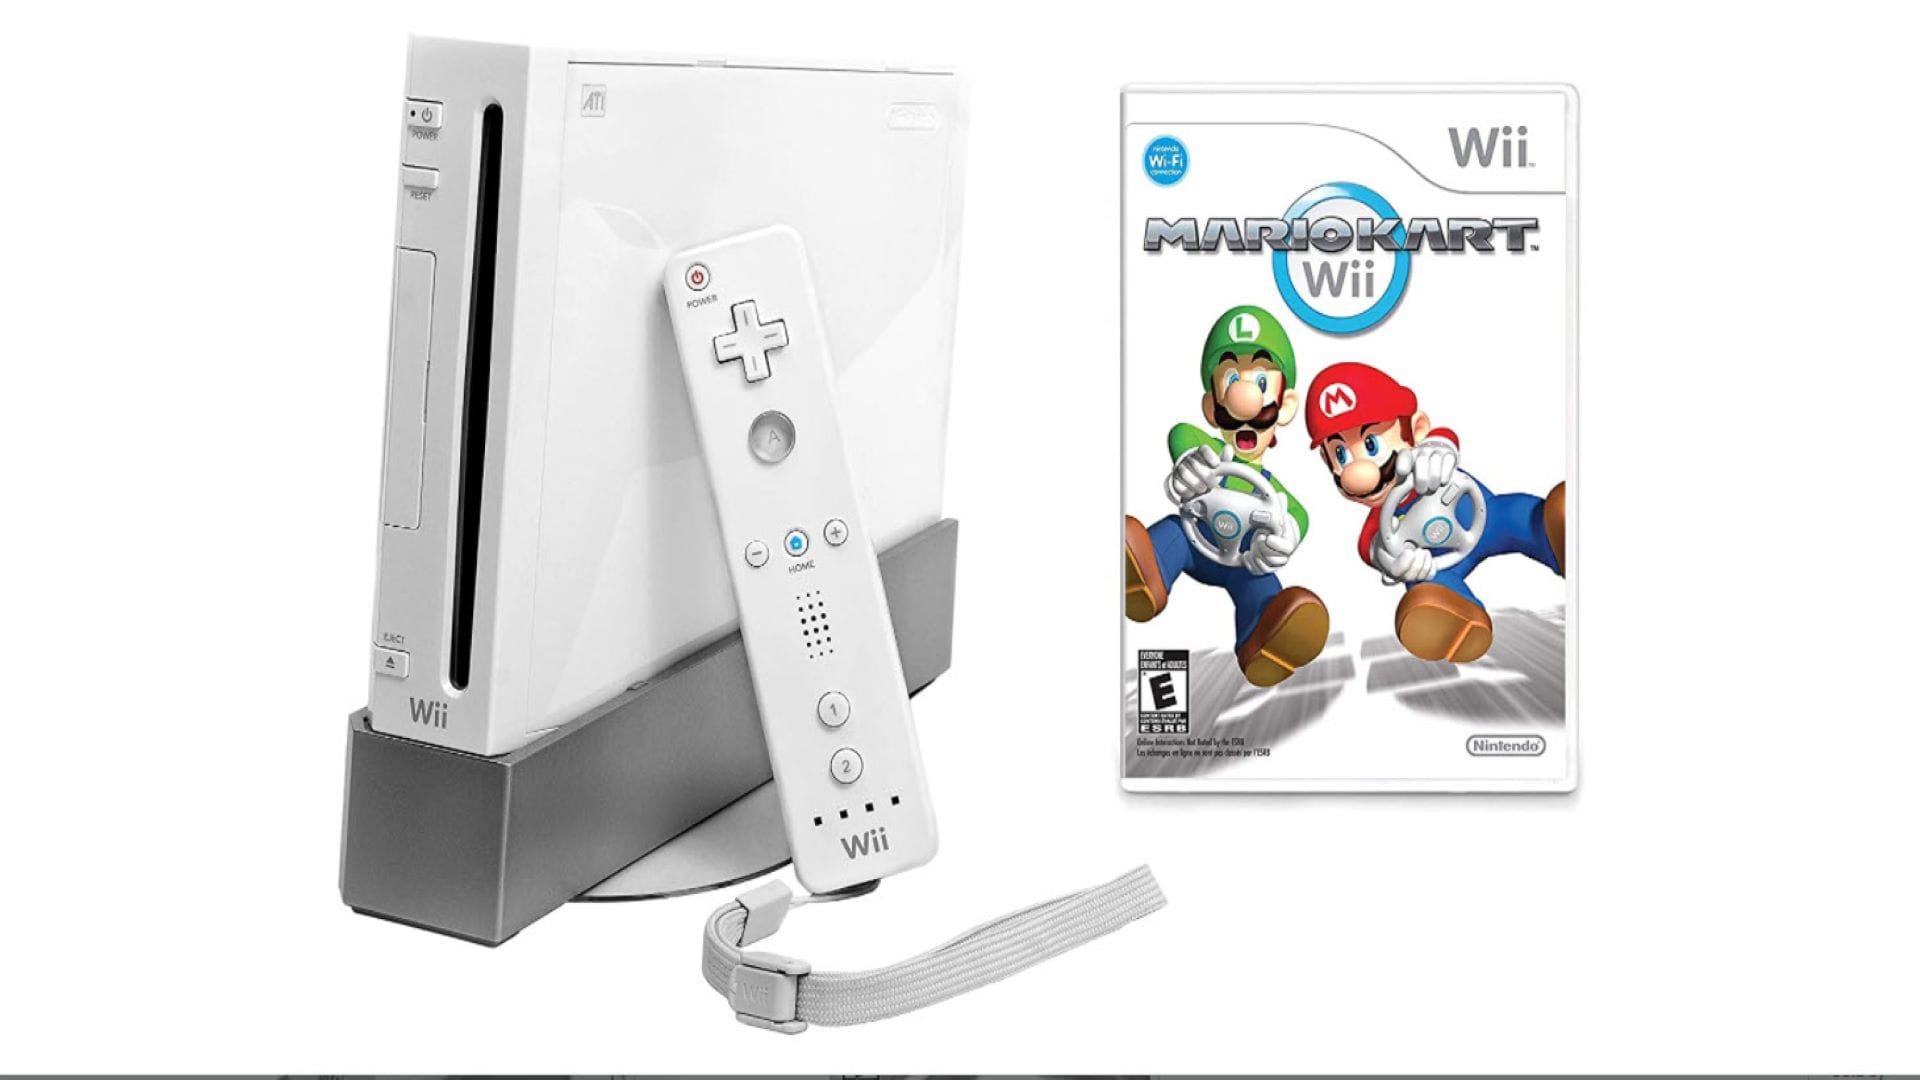 under rape Associate The Wii Is 15 Years Old | Nintendo Wii 15th Anniversary